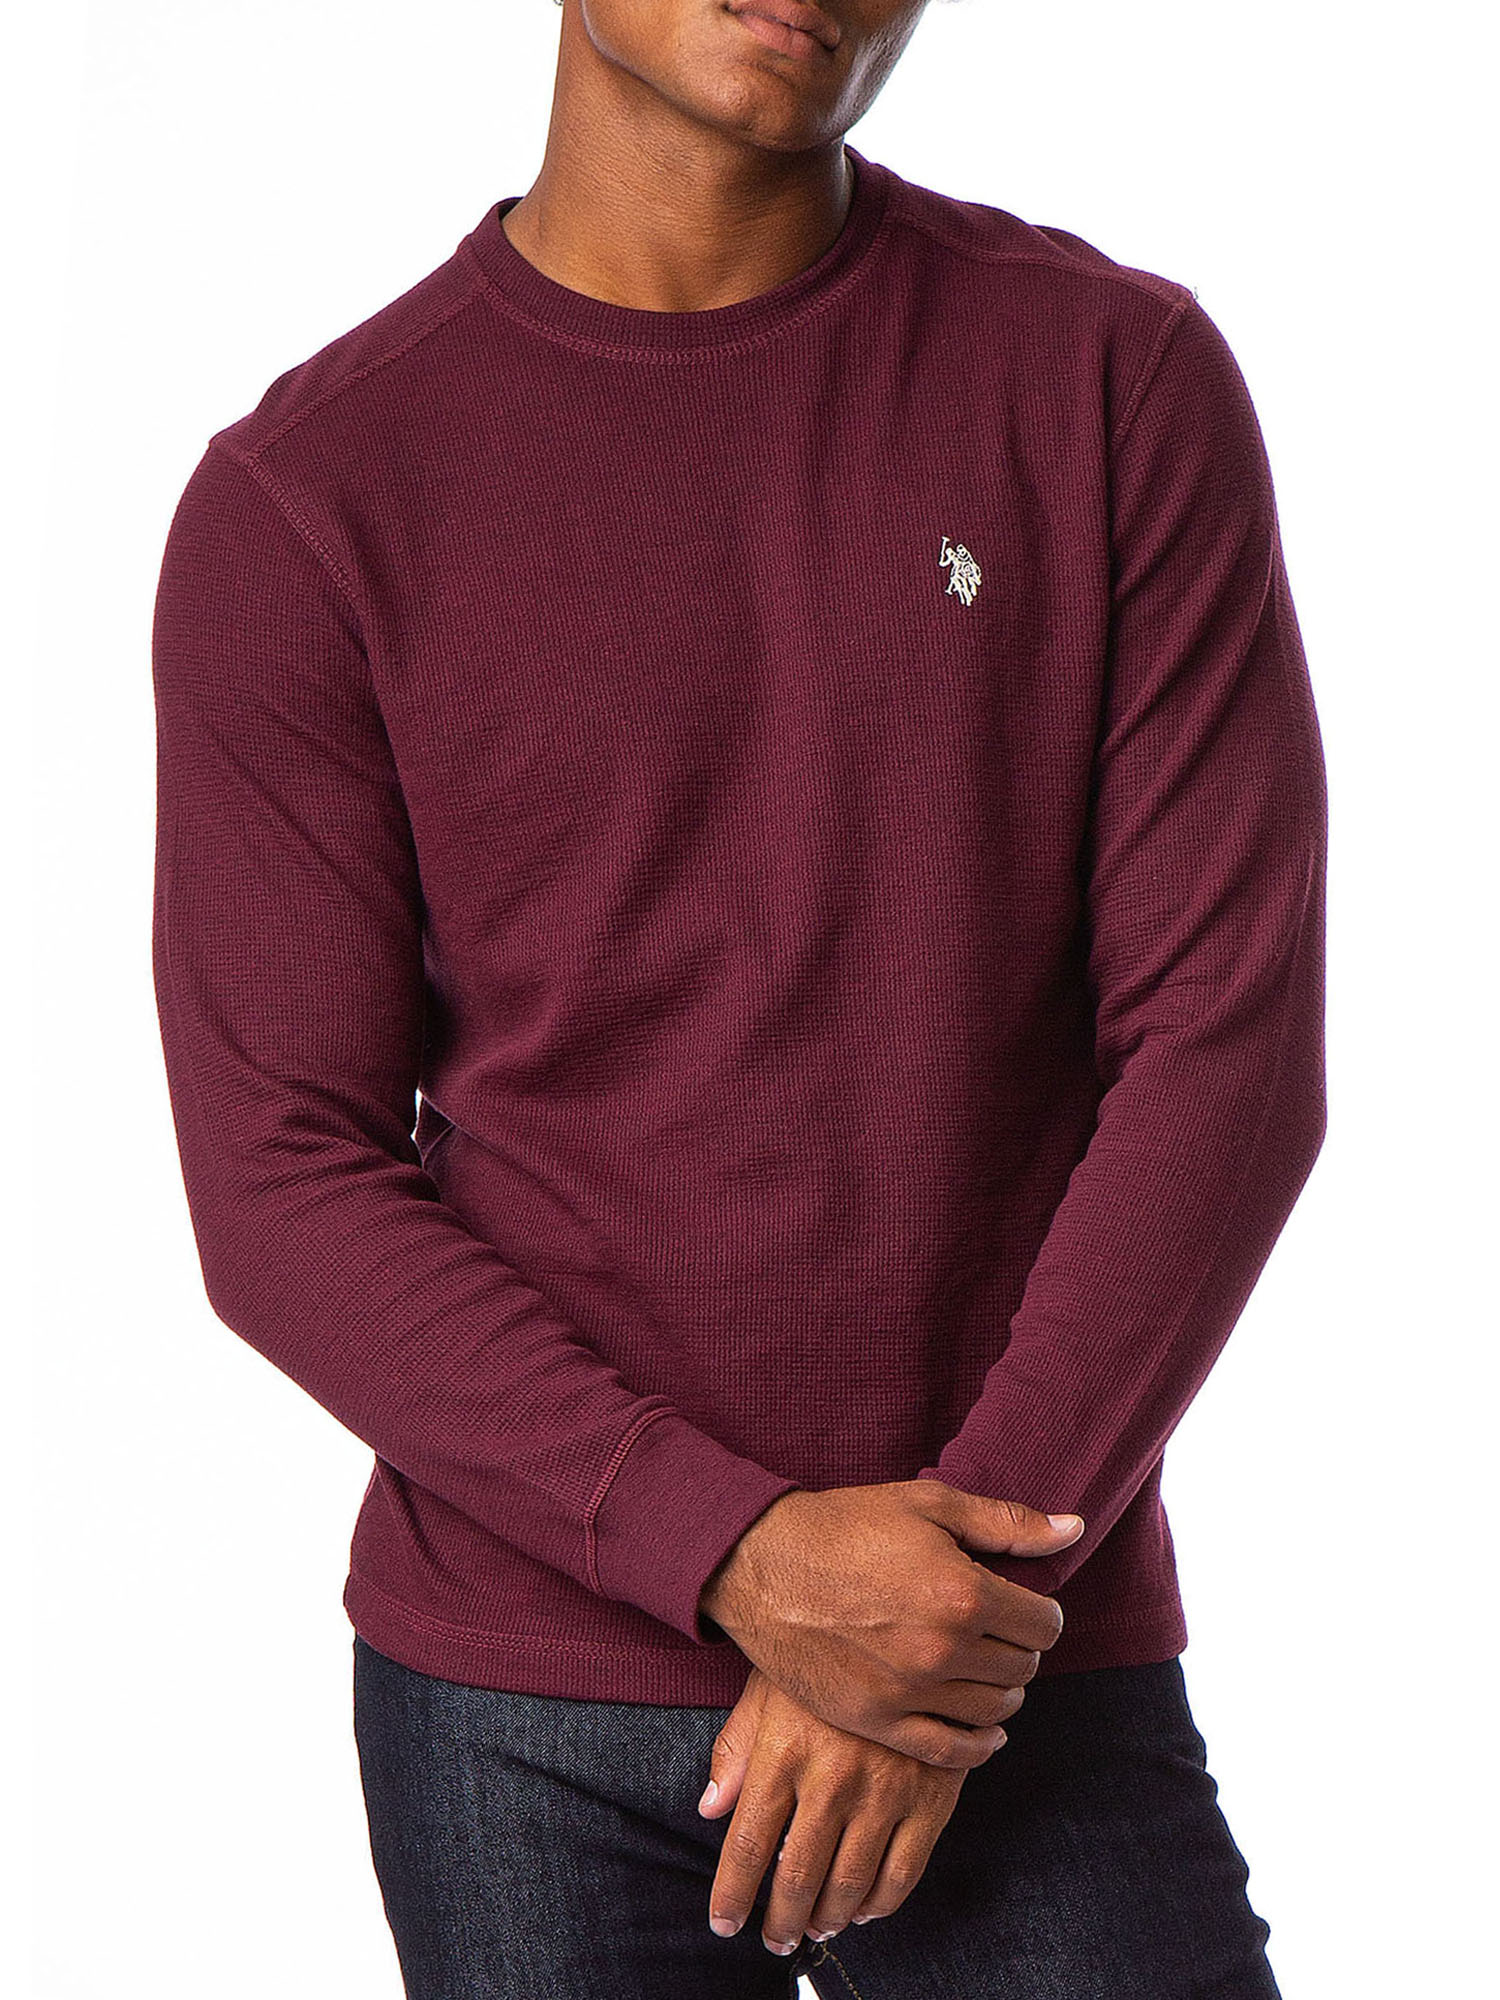 U.S. Polo Assn. Men's Knit Thermal T-Shirt - image 1 of 5